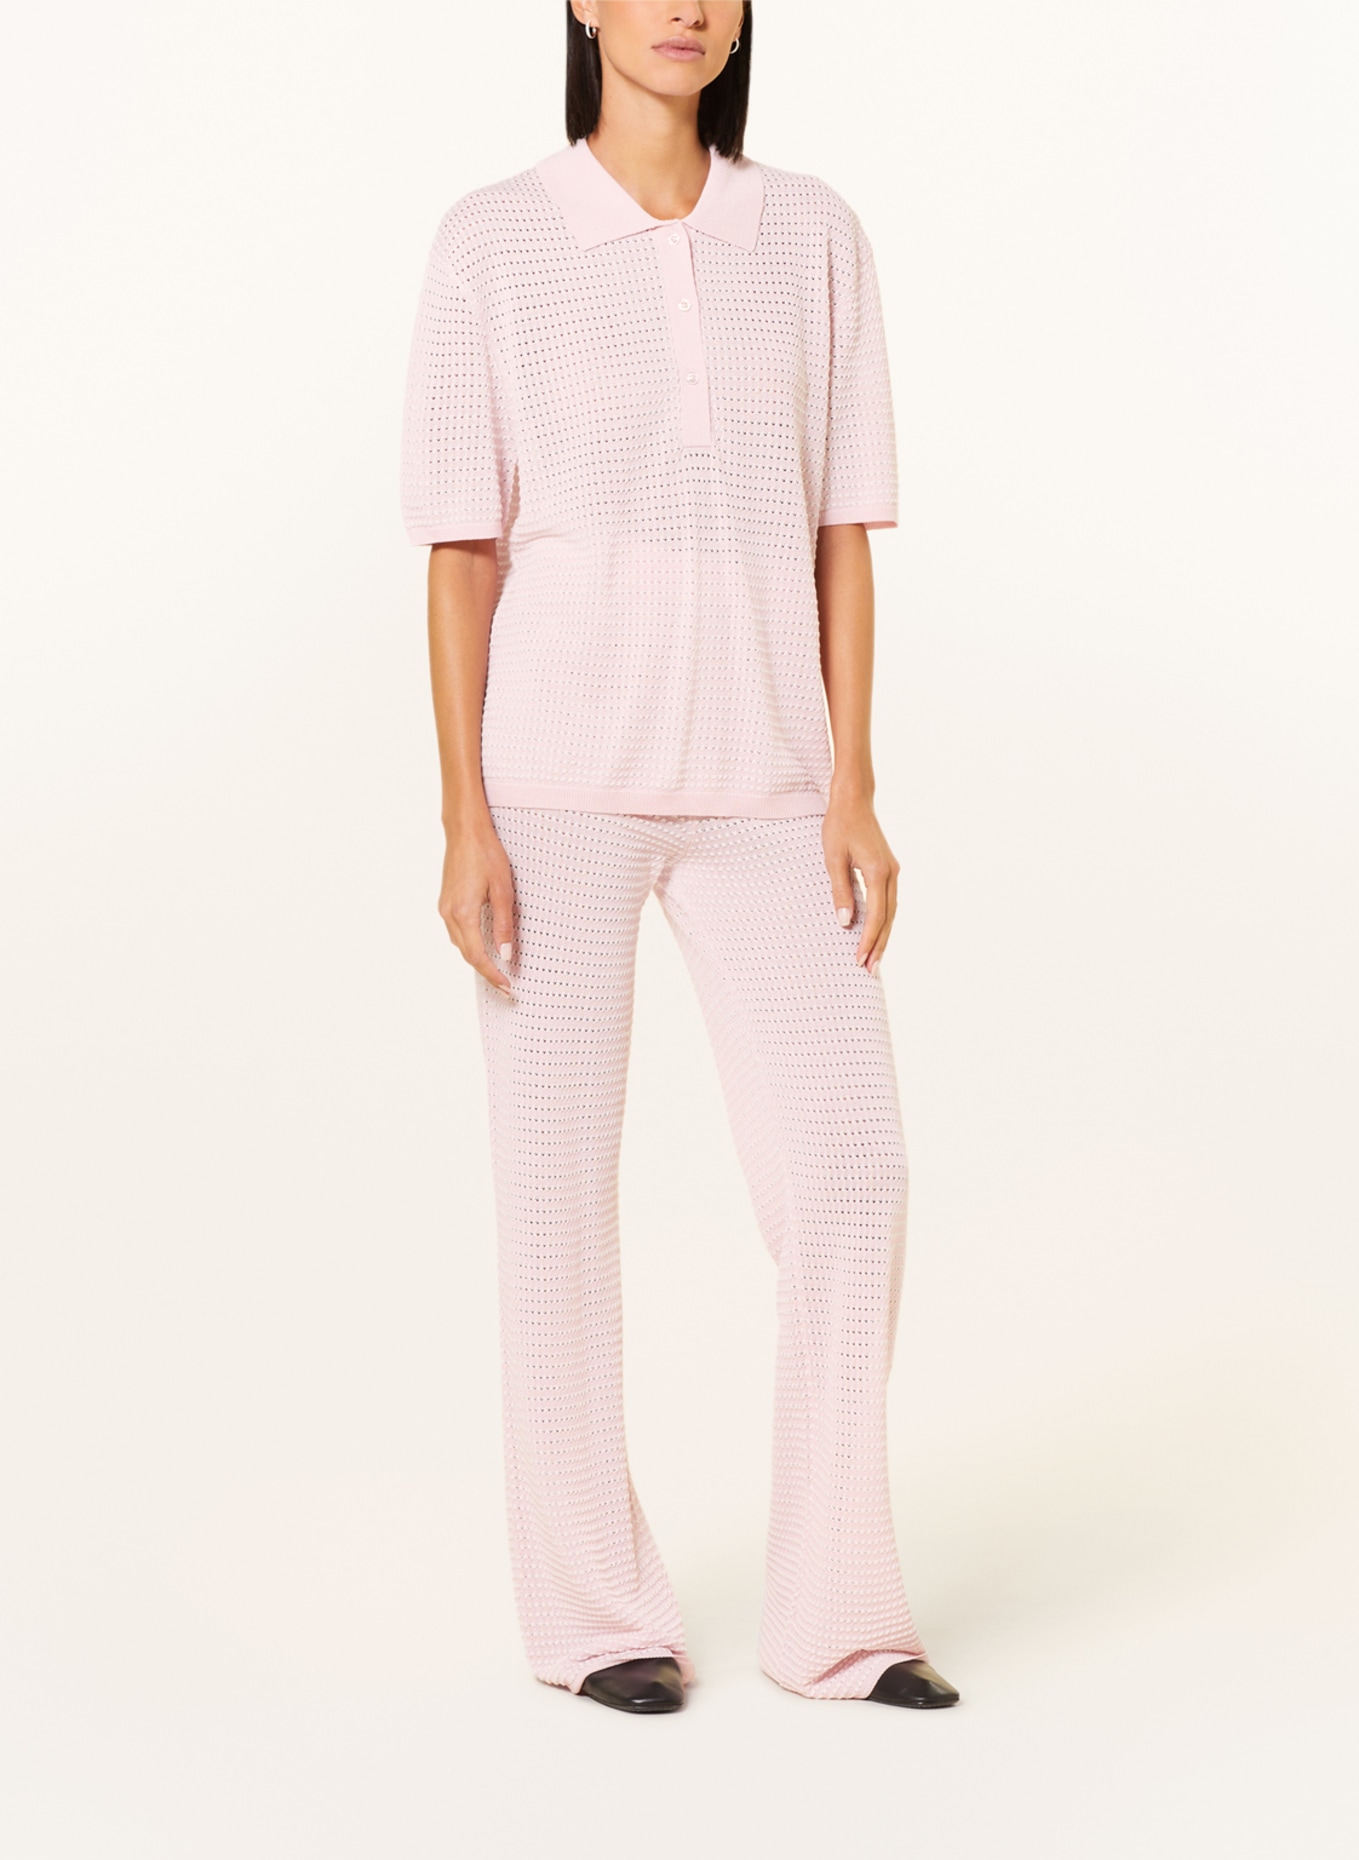 REMAIN Knit trousers, Color: LIGHT PINK/ WHITE (Image 2)